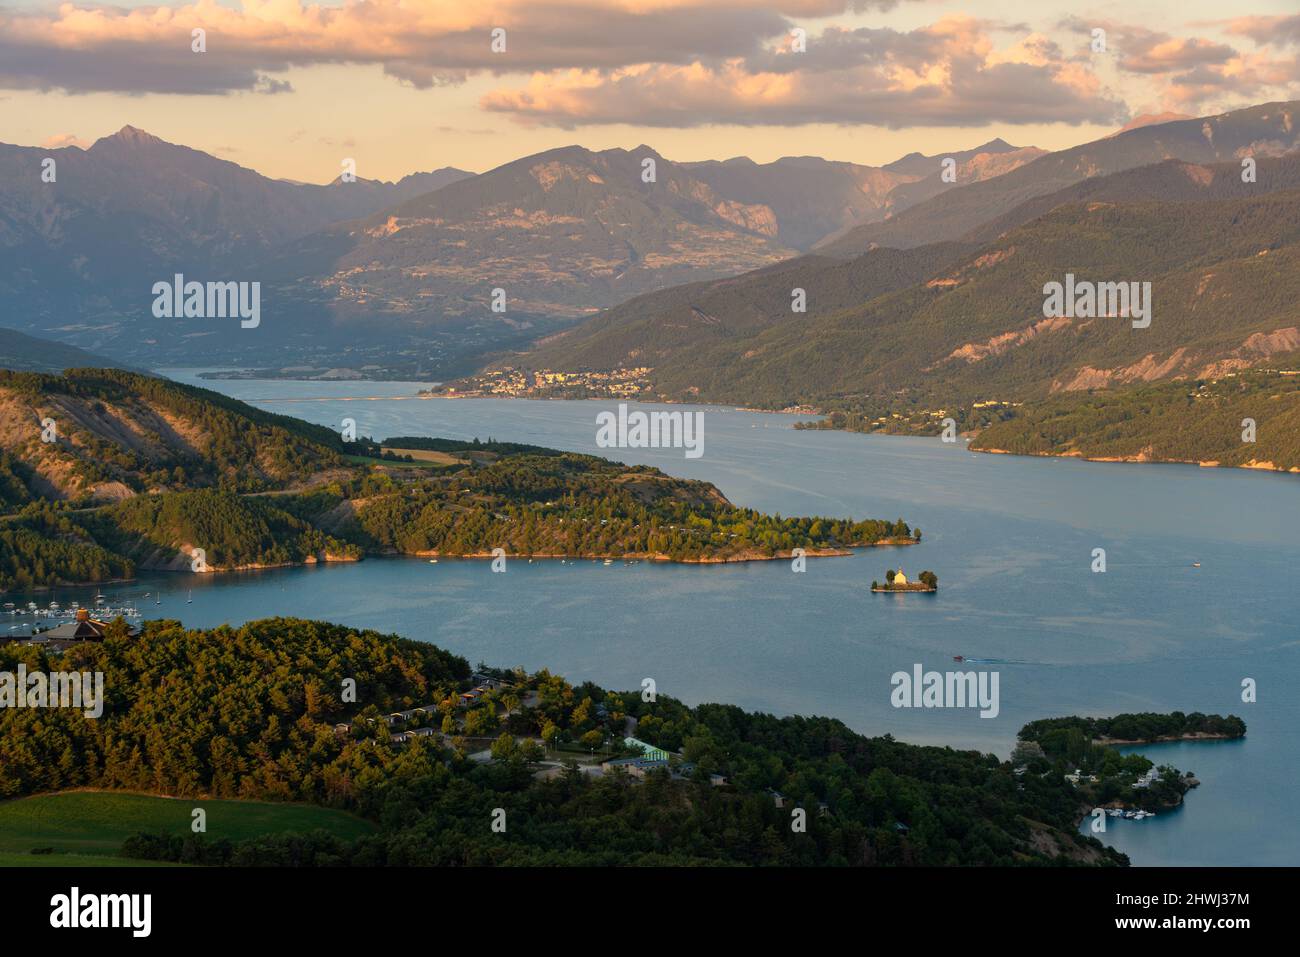 Serre-Poncon lake in the Hautes-Alpes (Alps). Sunset light on the village of Savines-le-Lac and Saint-Michel Bay. France Stock Photo